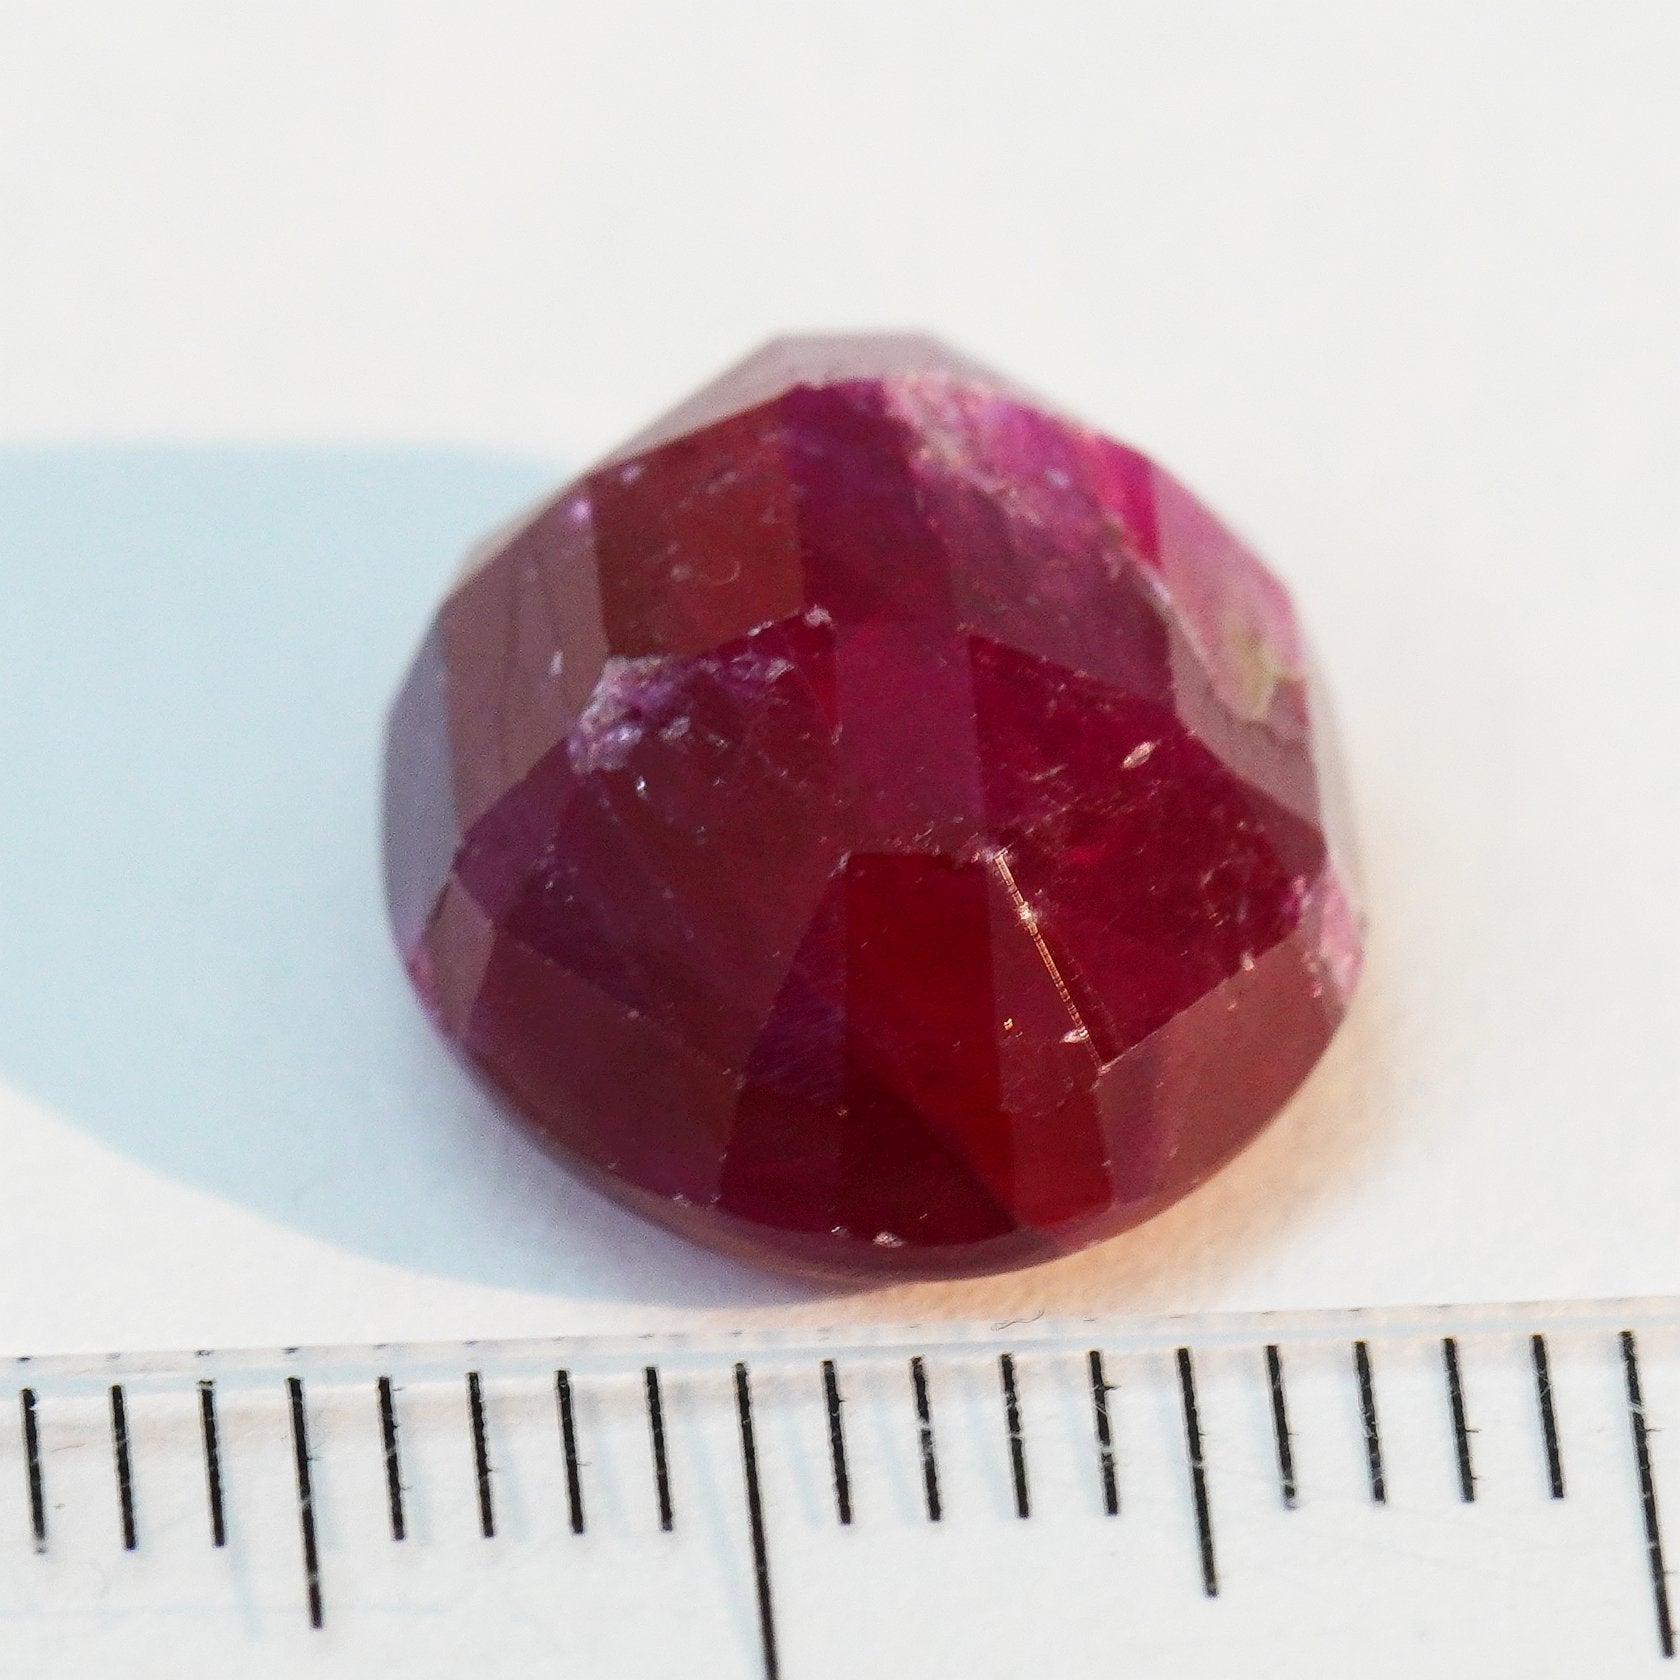 10.58Ct Faceted Ruby Cab Longido Untreated Unheated